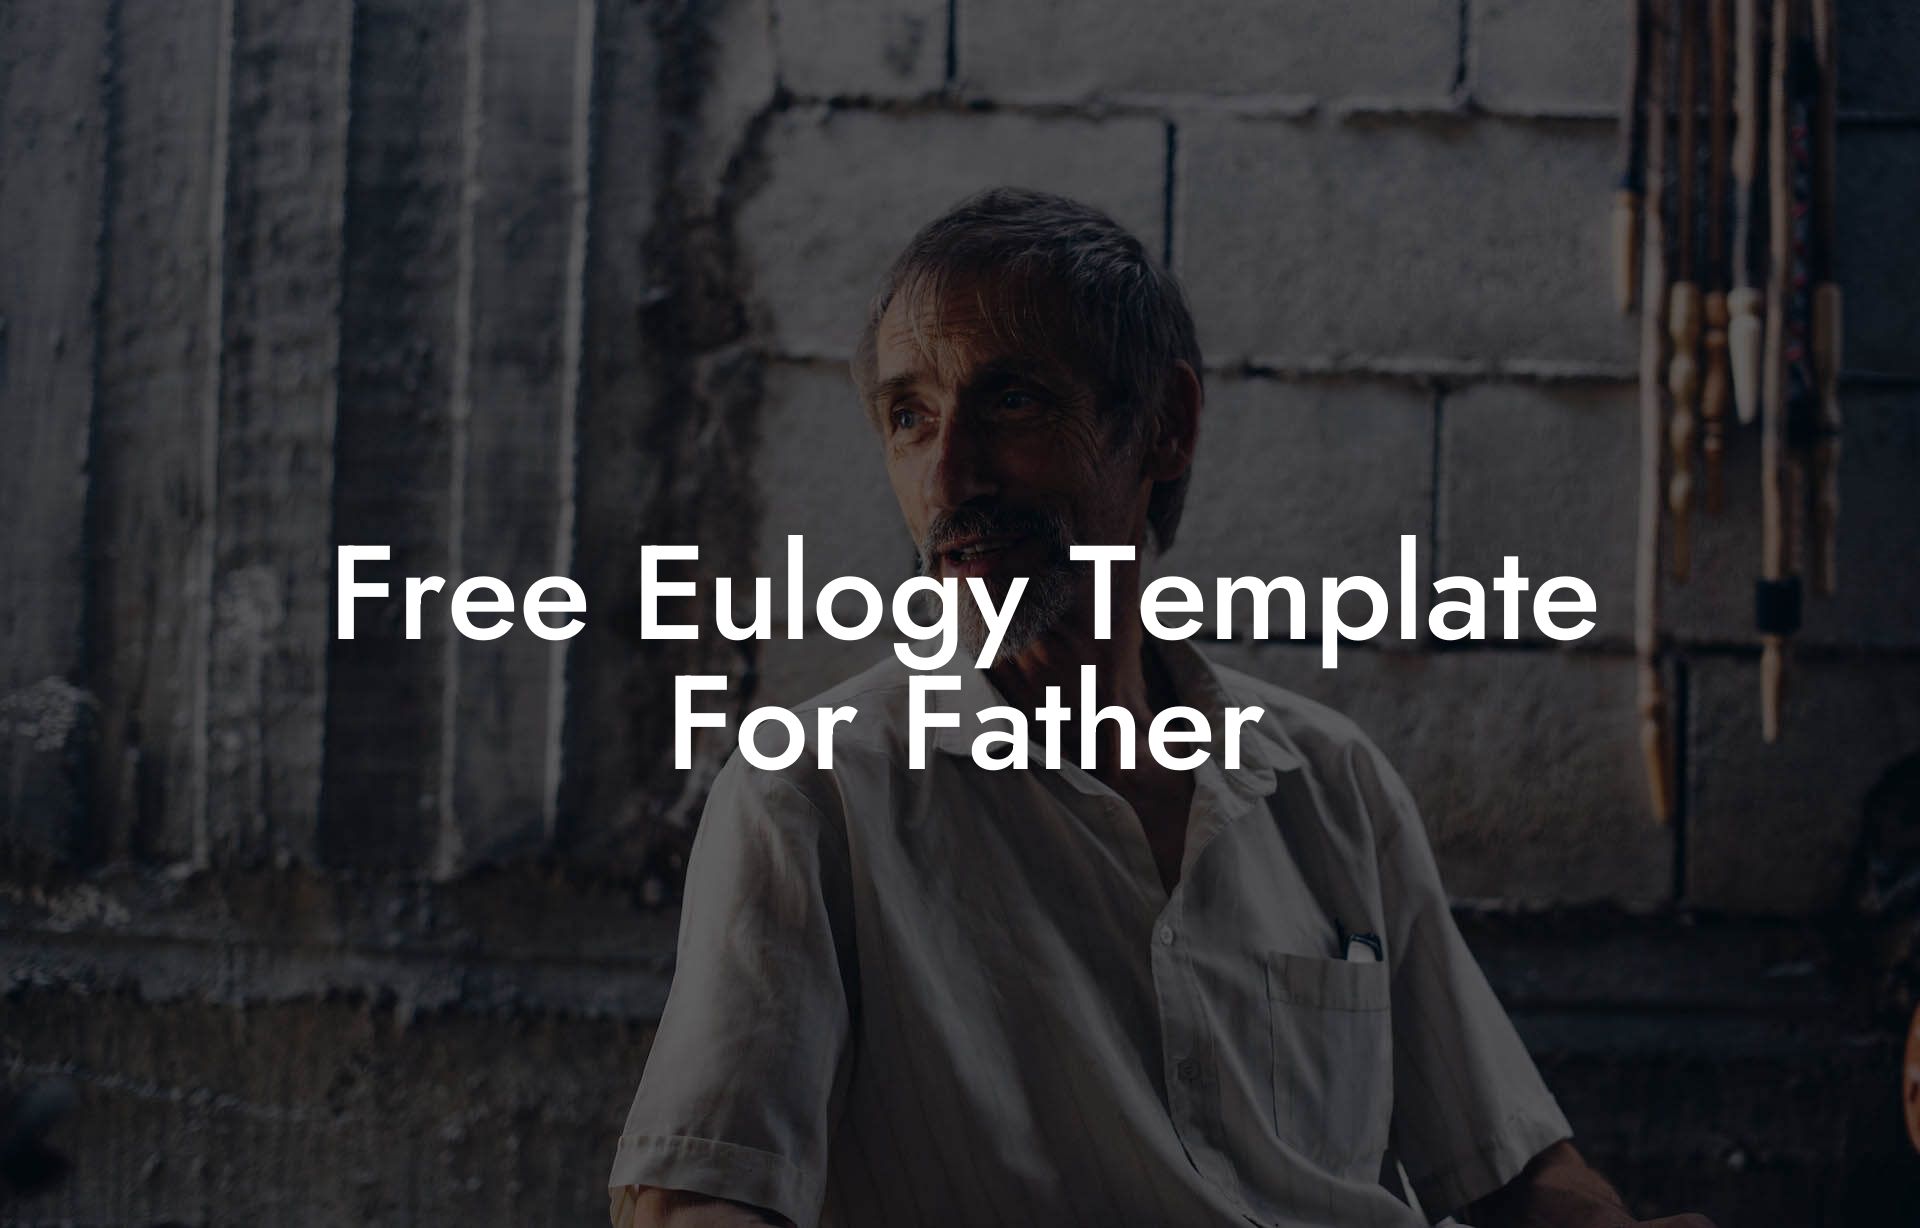 Free Eulogy Template For Father